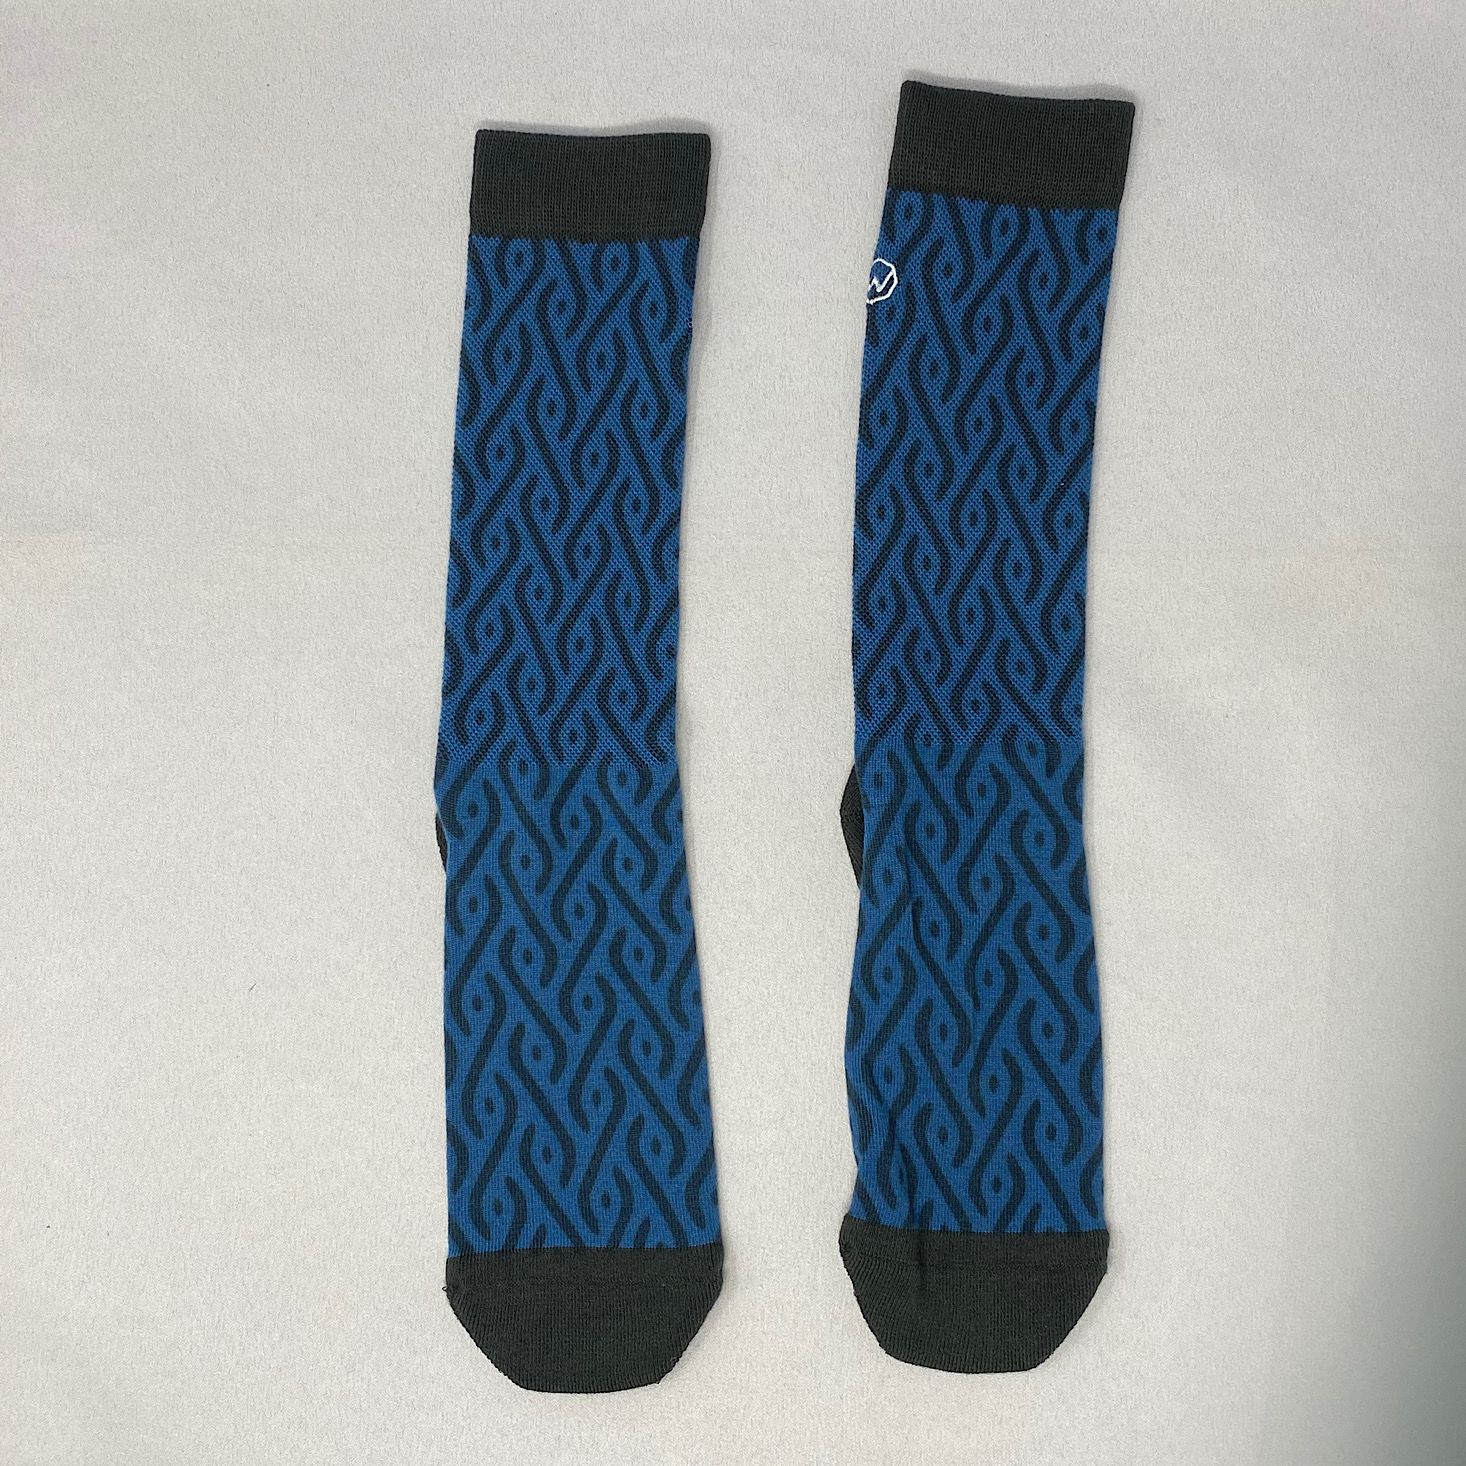 Wohven Socks Subscription Review + Coupon - October 2020 | MSA